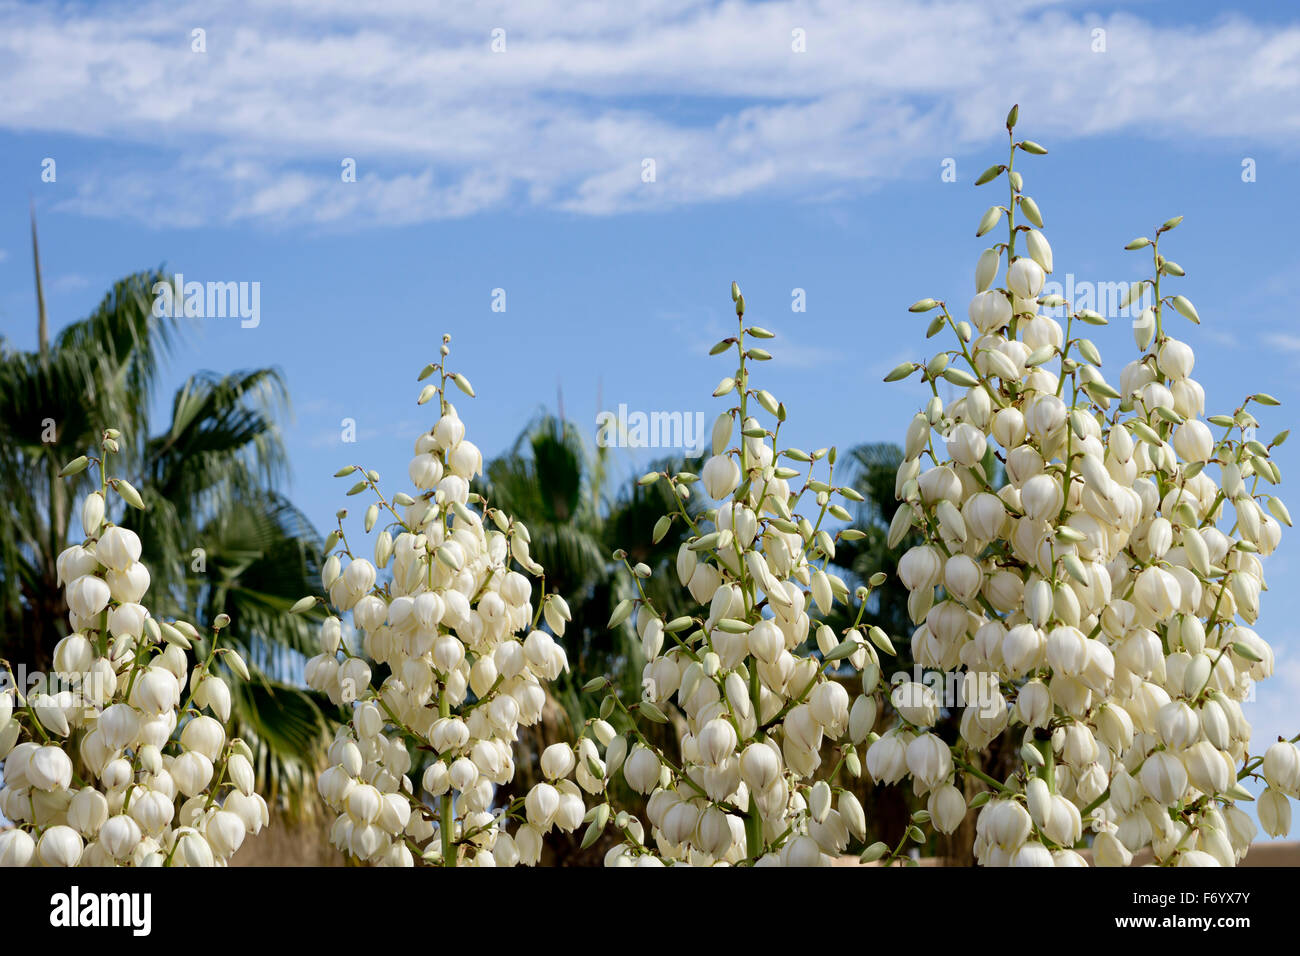 Yucca flowers against a blue sky Stock Photo